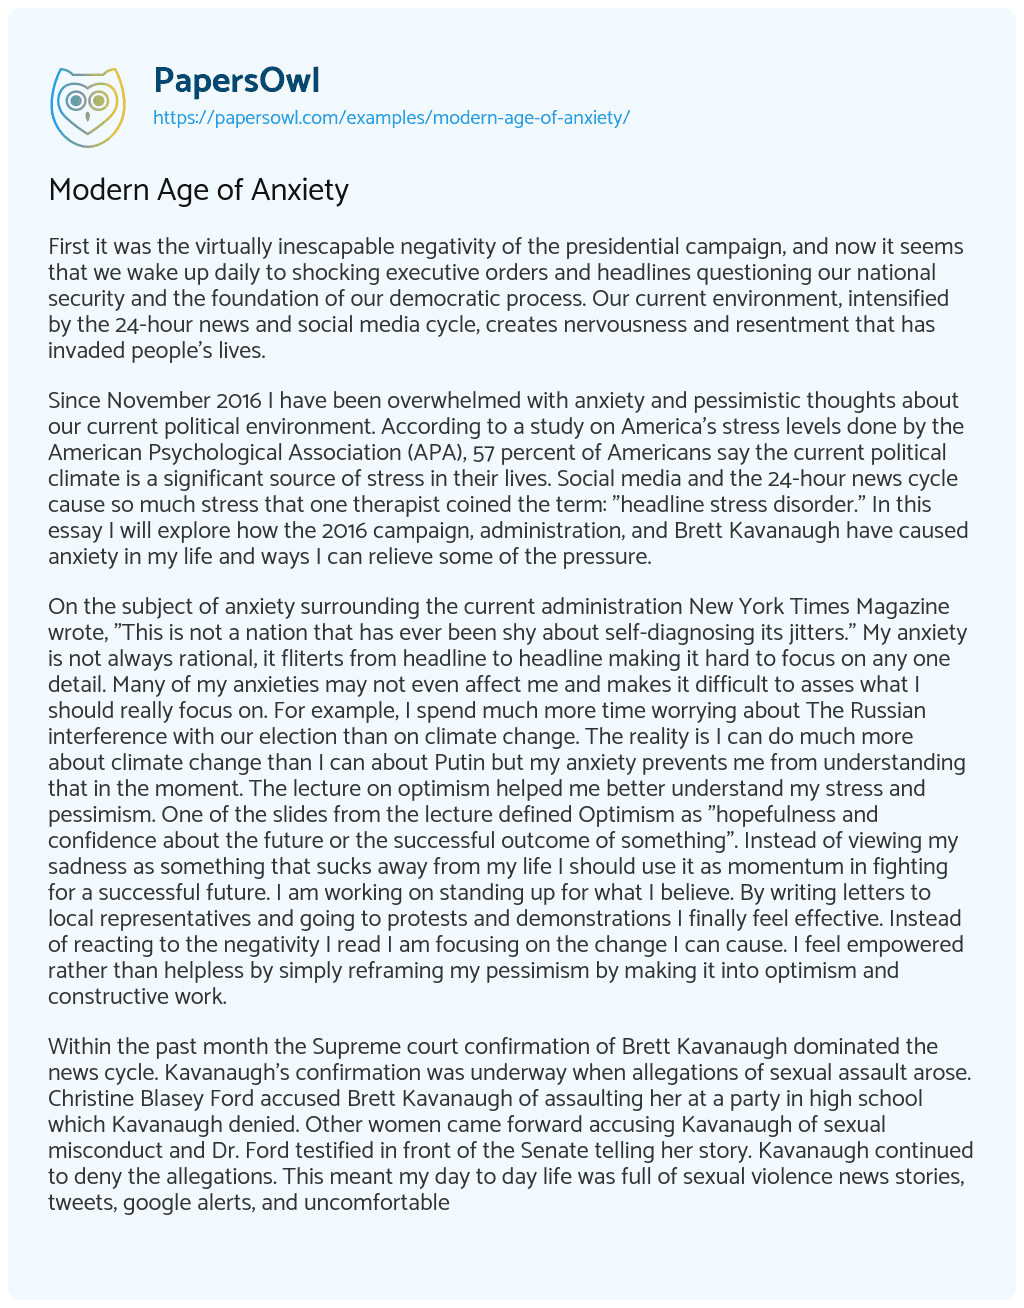 Essay on Modern Age of Anxiety